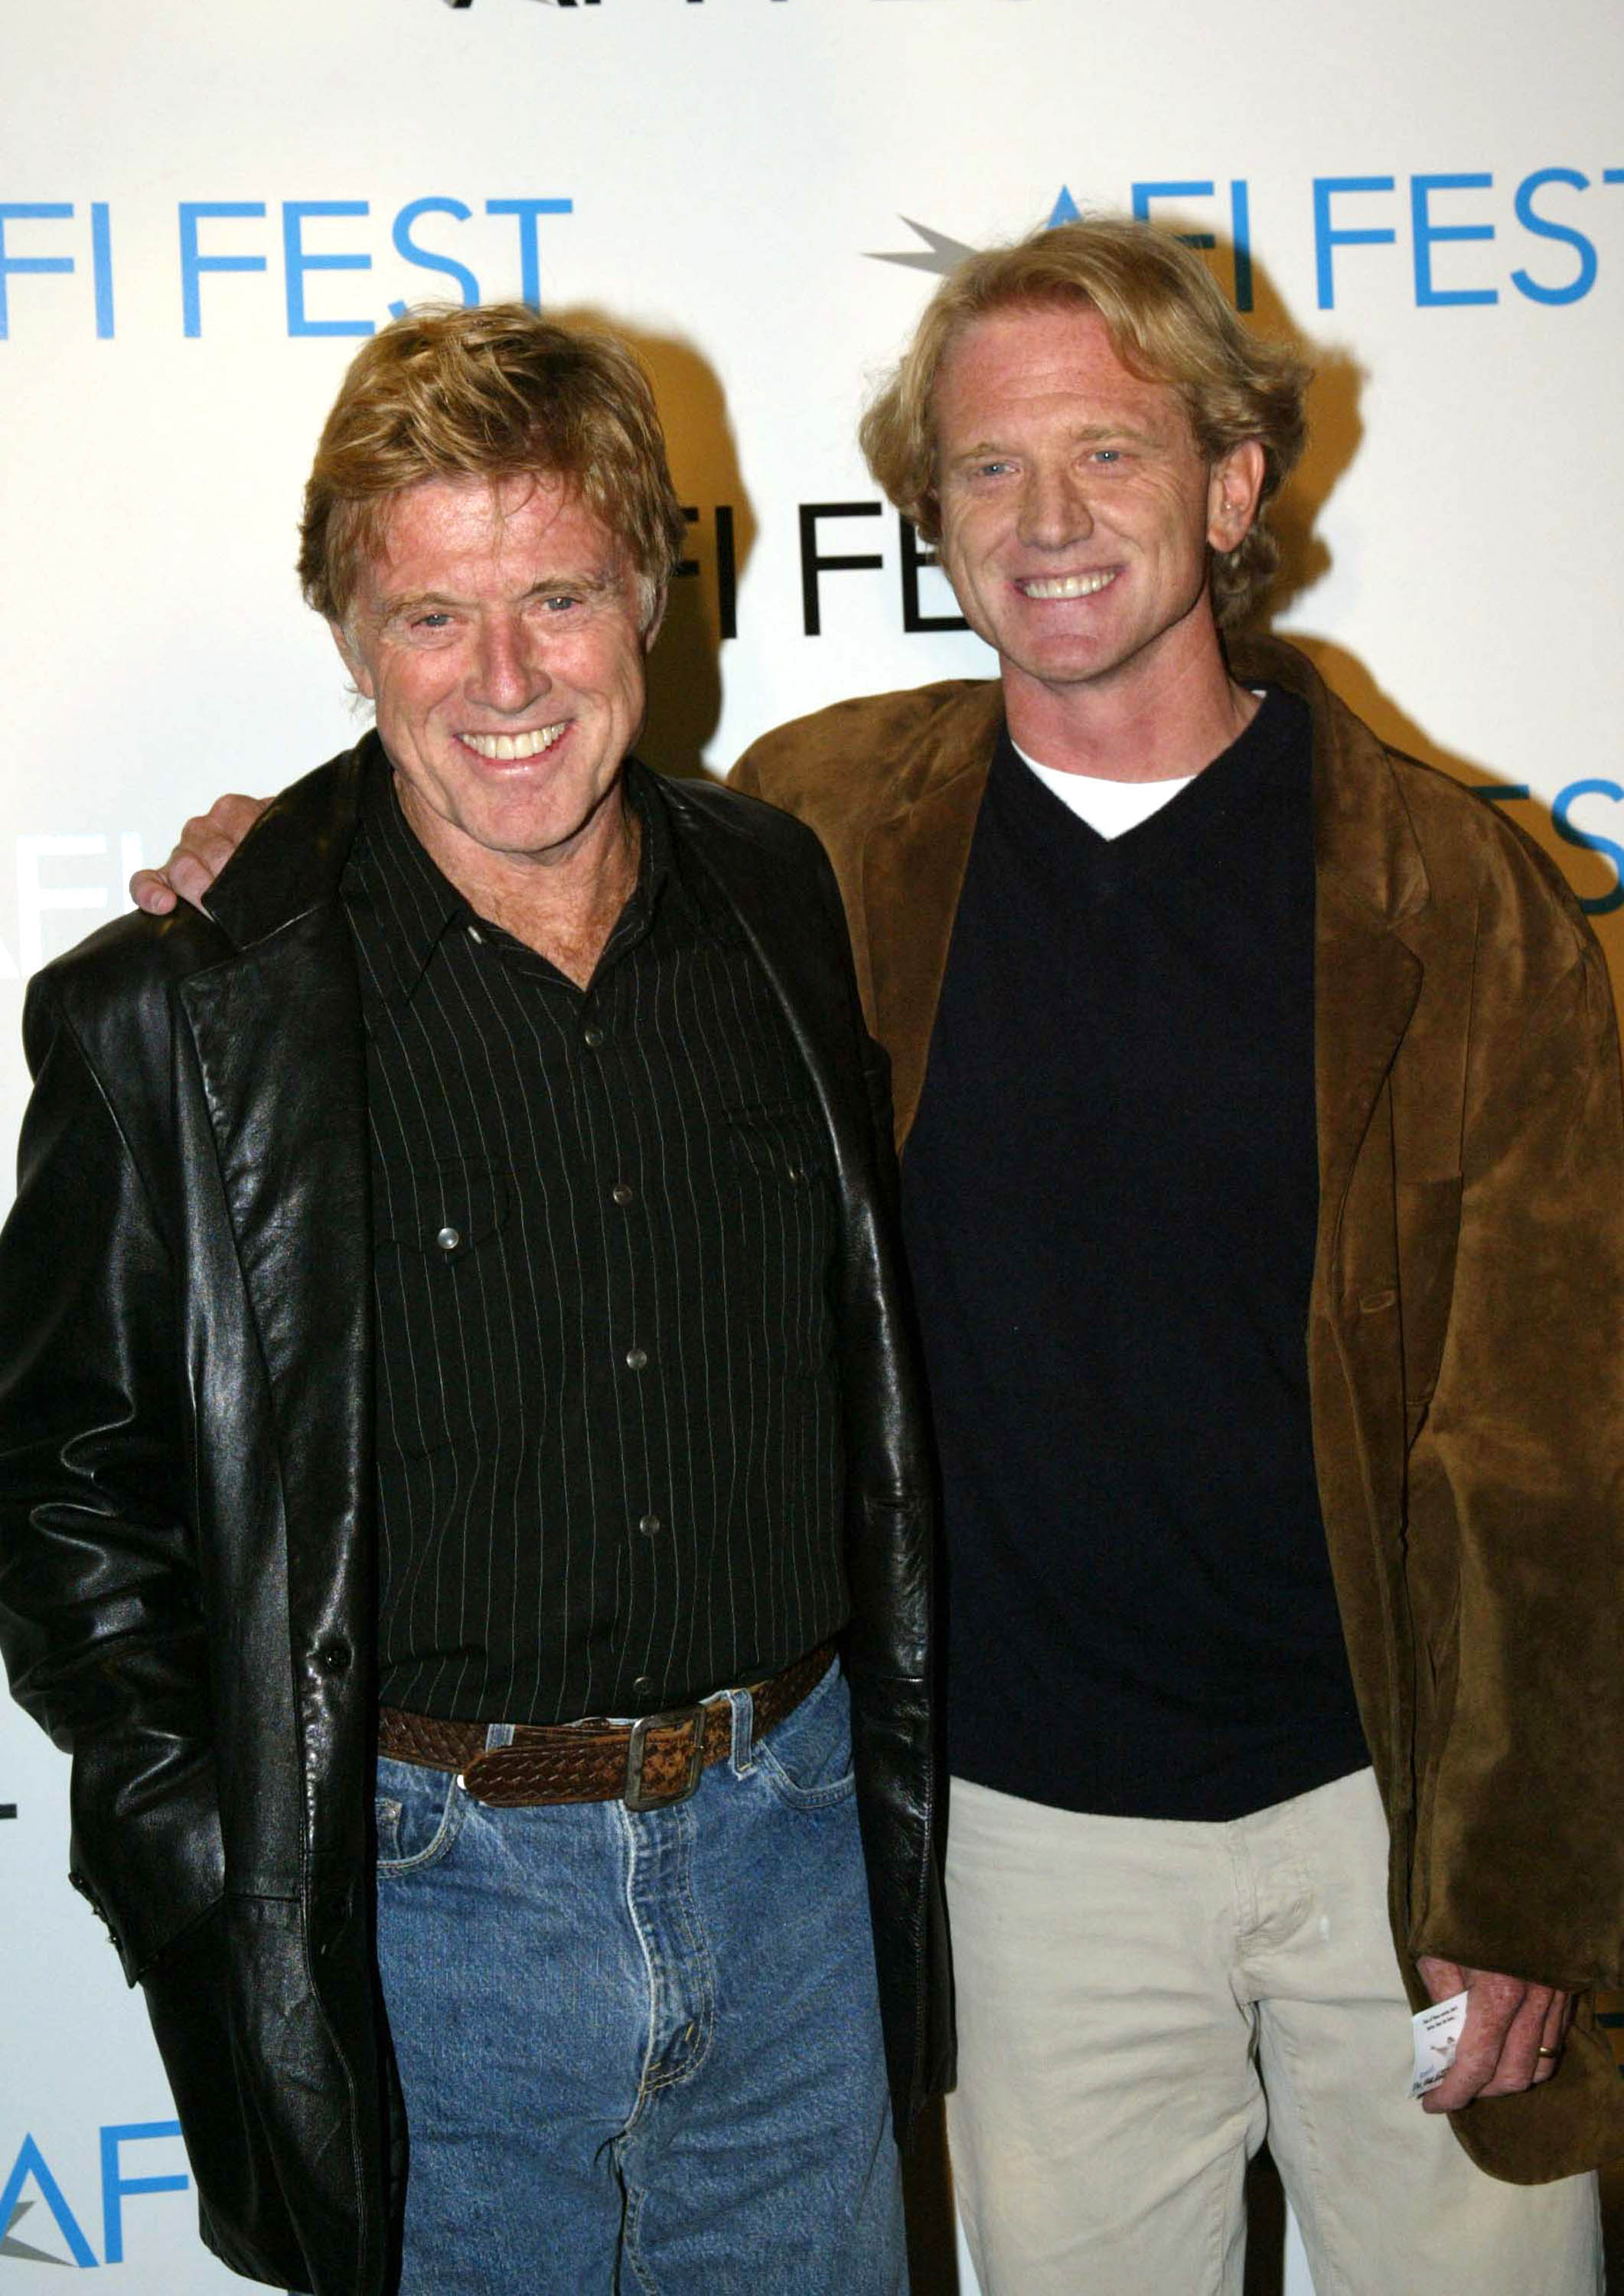 Robert Redford and James Redford in Hollywood, California, during the screening of "Spin" | Source: Getty Images 